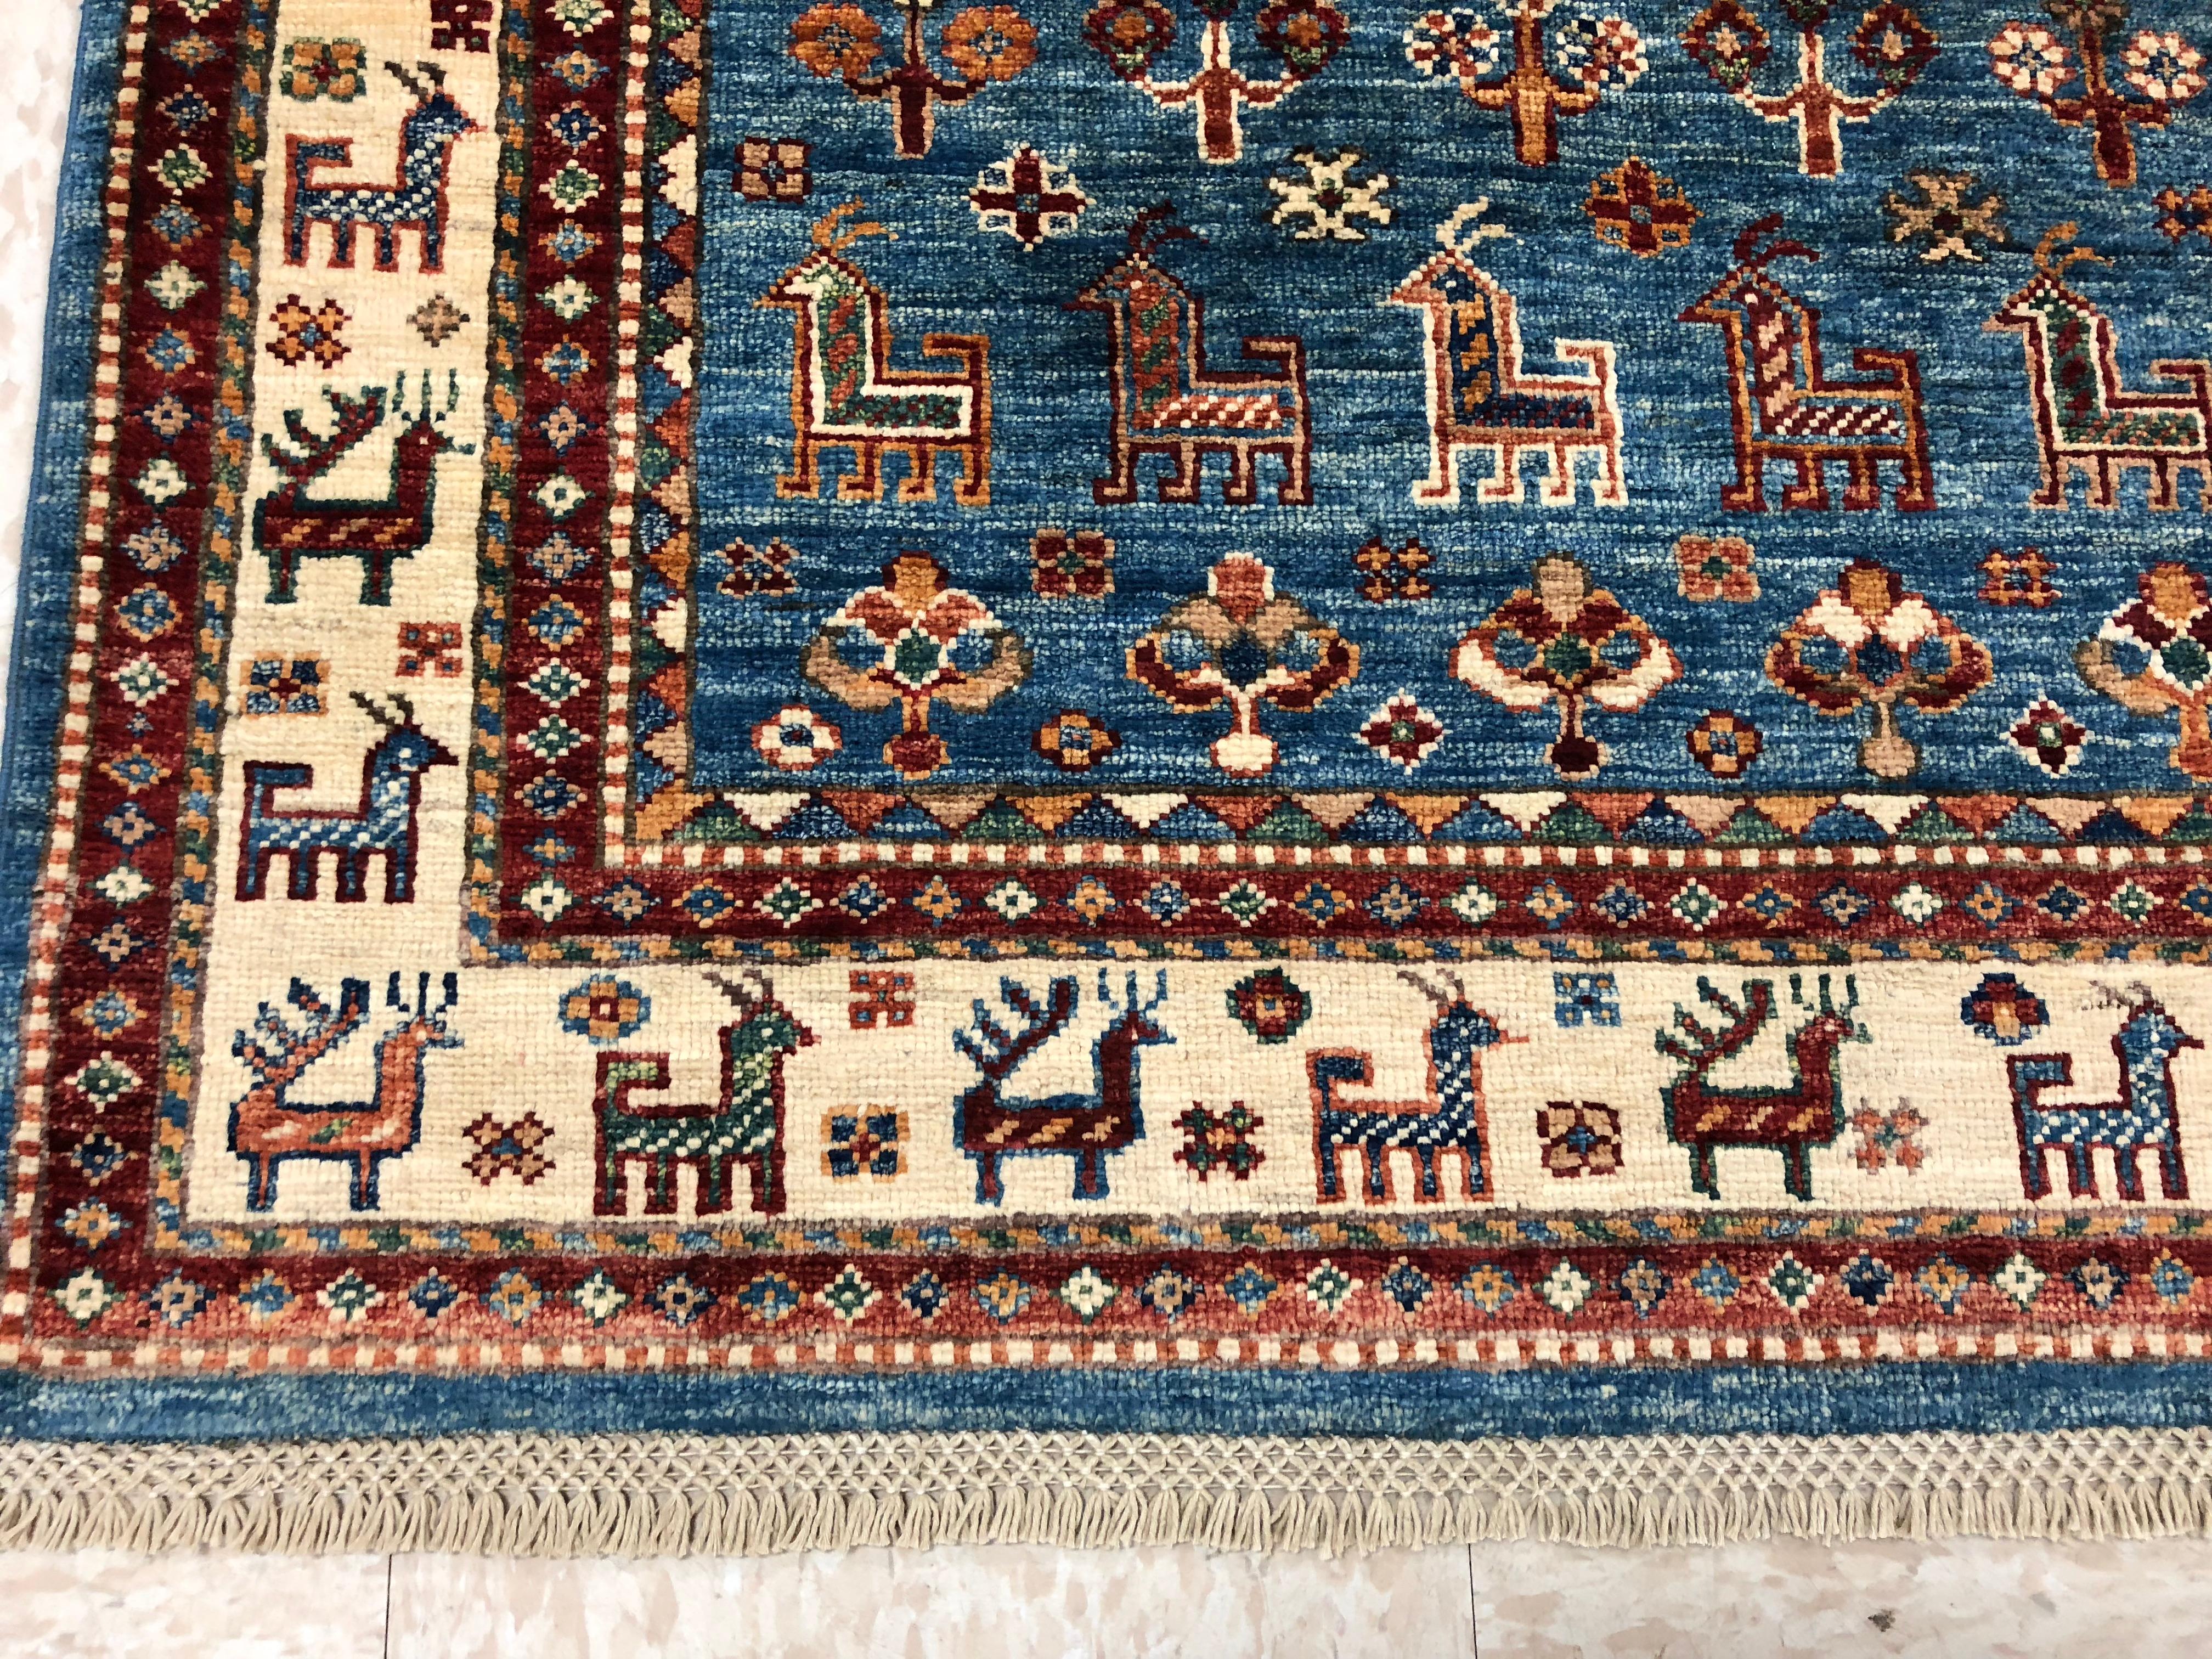 Afghan rugs are handwoven in Afghanistan. This country has a long history in weaving rugs. A big number of rugs that were handwoven in Pakistan were actually handwoven by Afghan refugees who fled Afghanistan after Russia invaded this country in